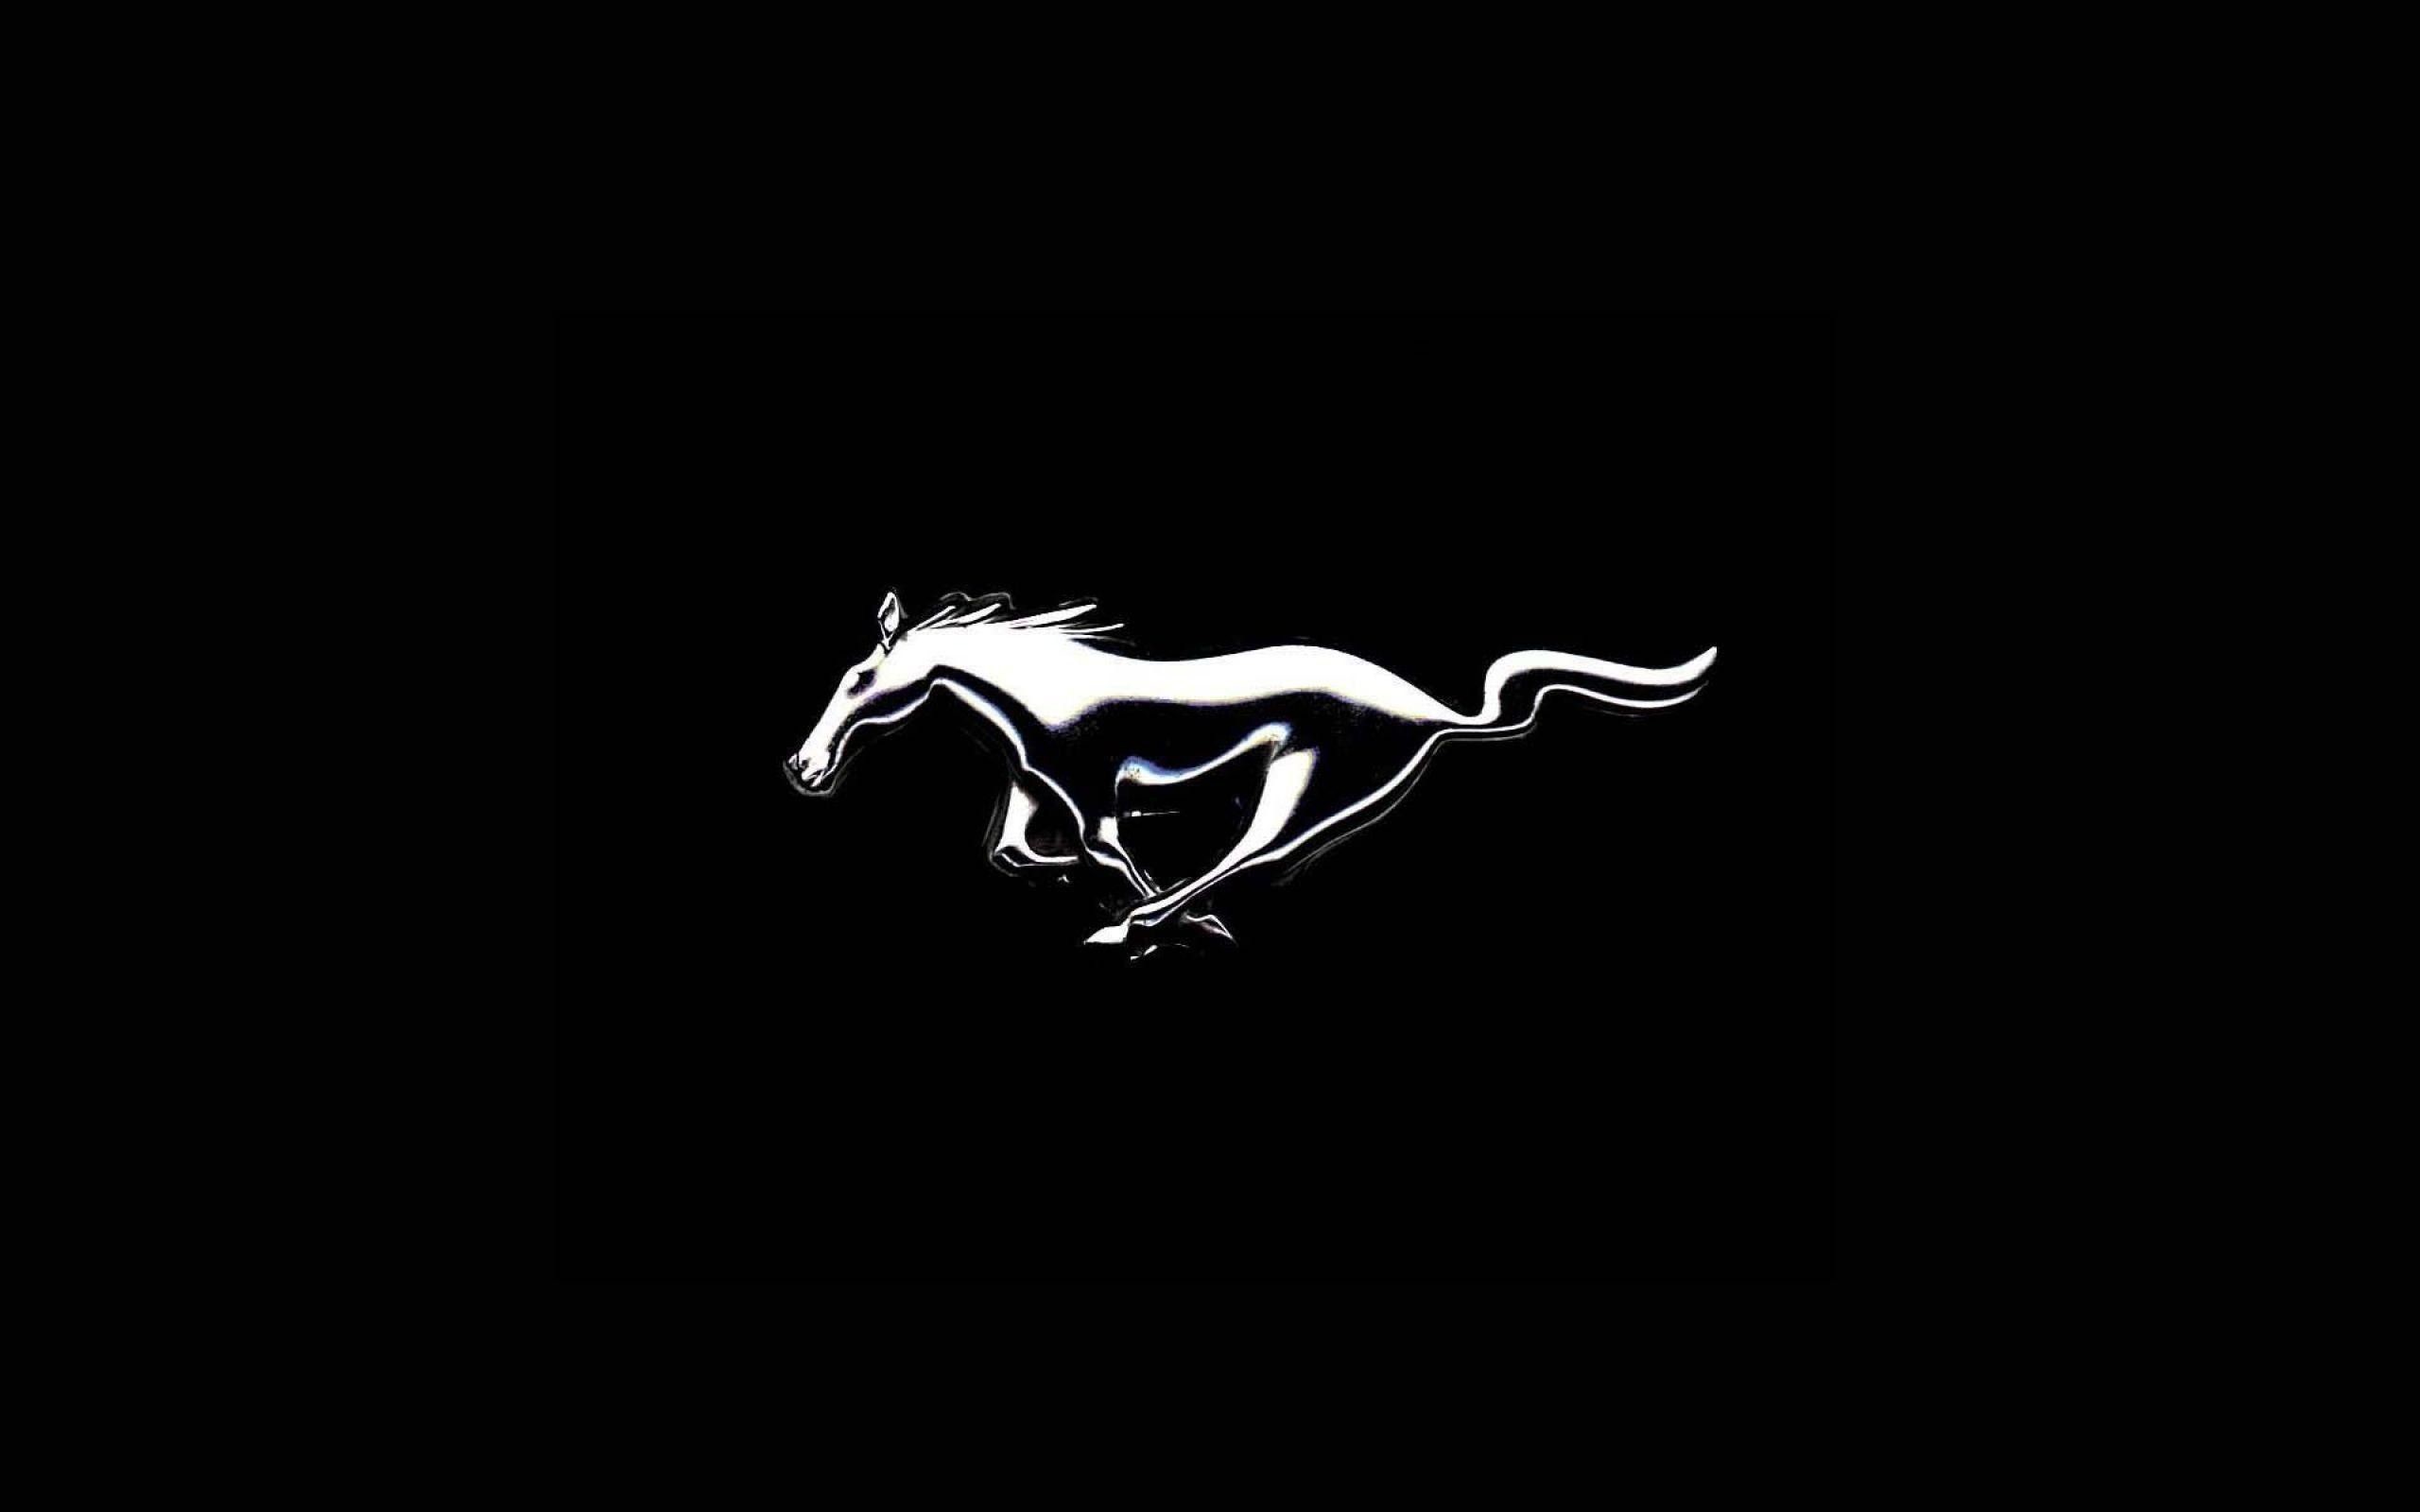 2560x1600 Ford Mustang Logo Wallpapers Hd Wallpaper Gallery, ford mustang hd ... | A  story about a horse | Mustang logo, Mustang wallpaper, Ford mustang logo